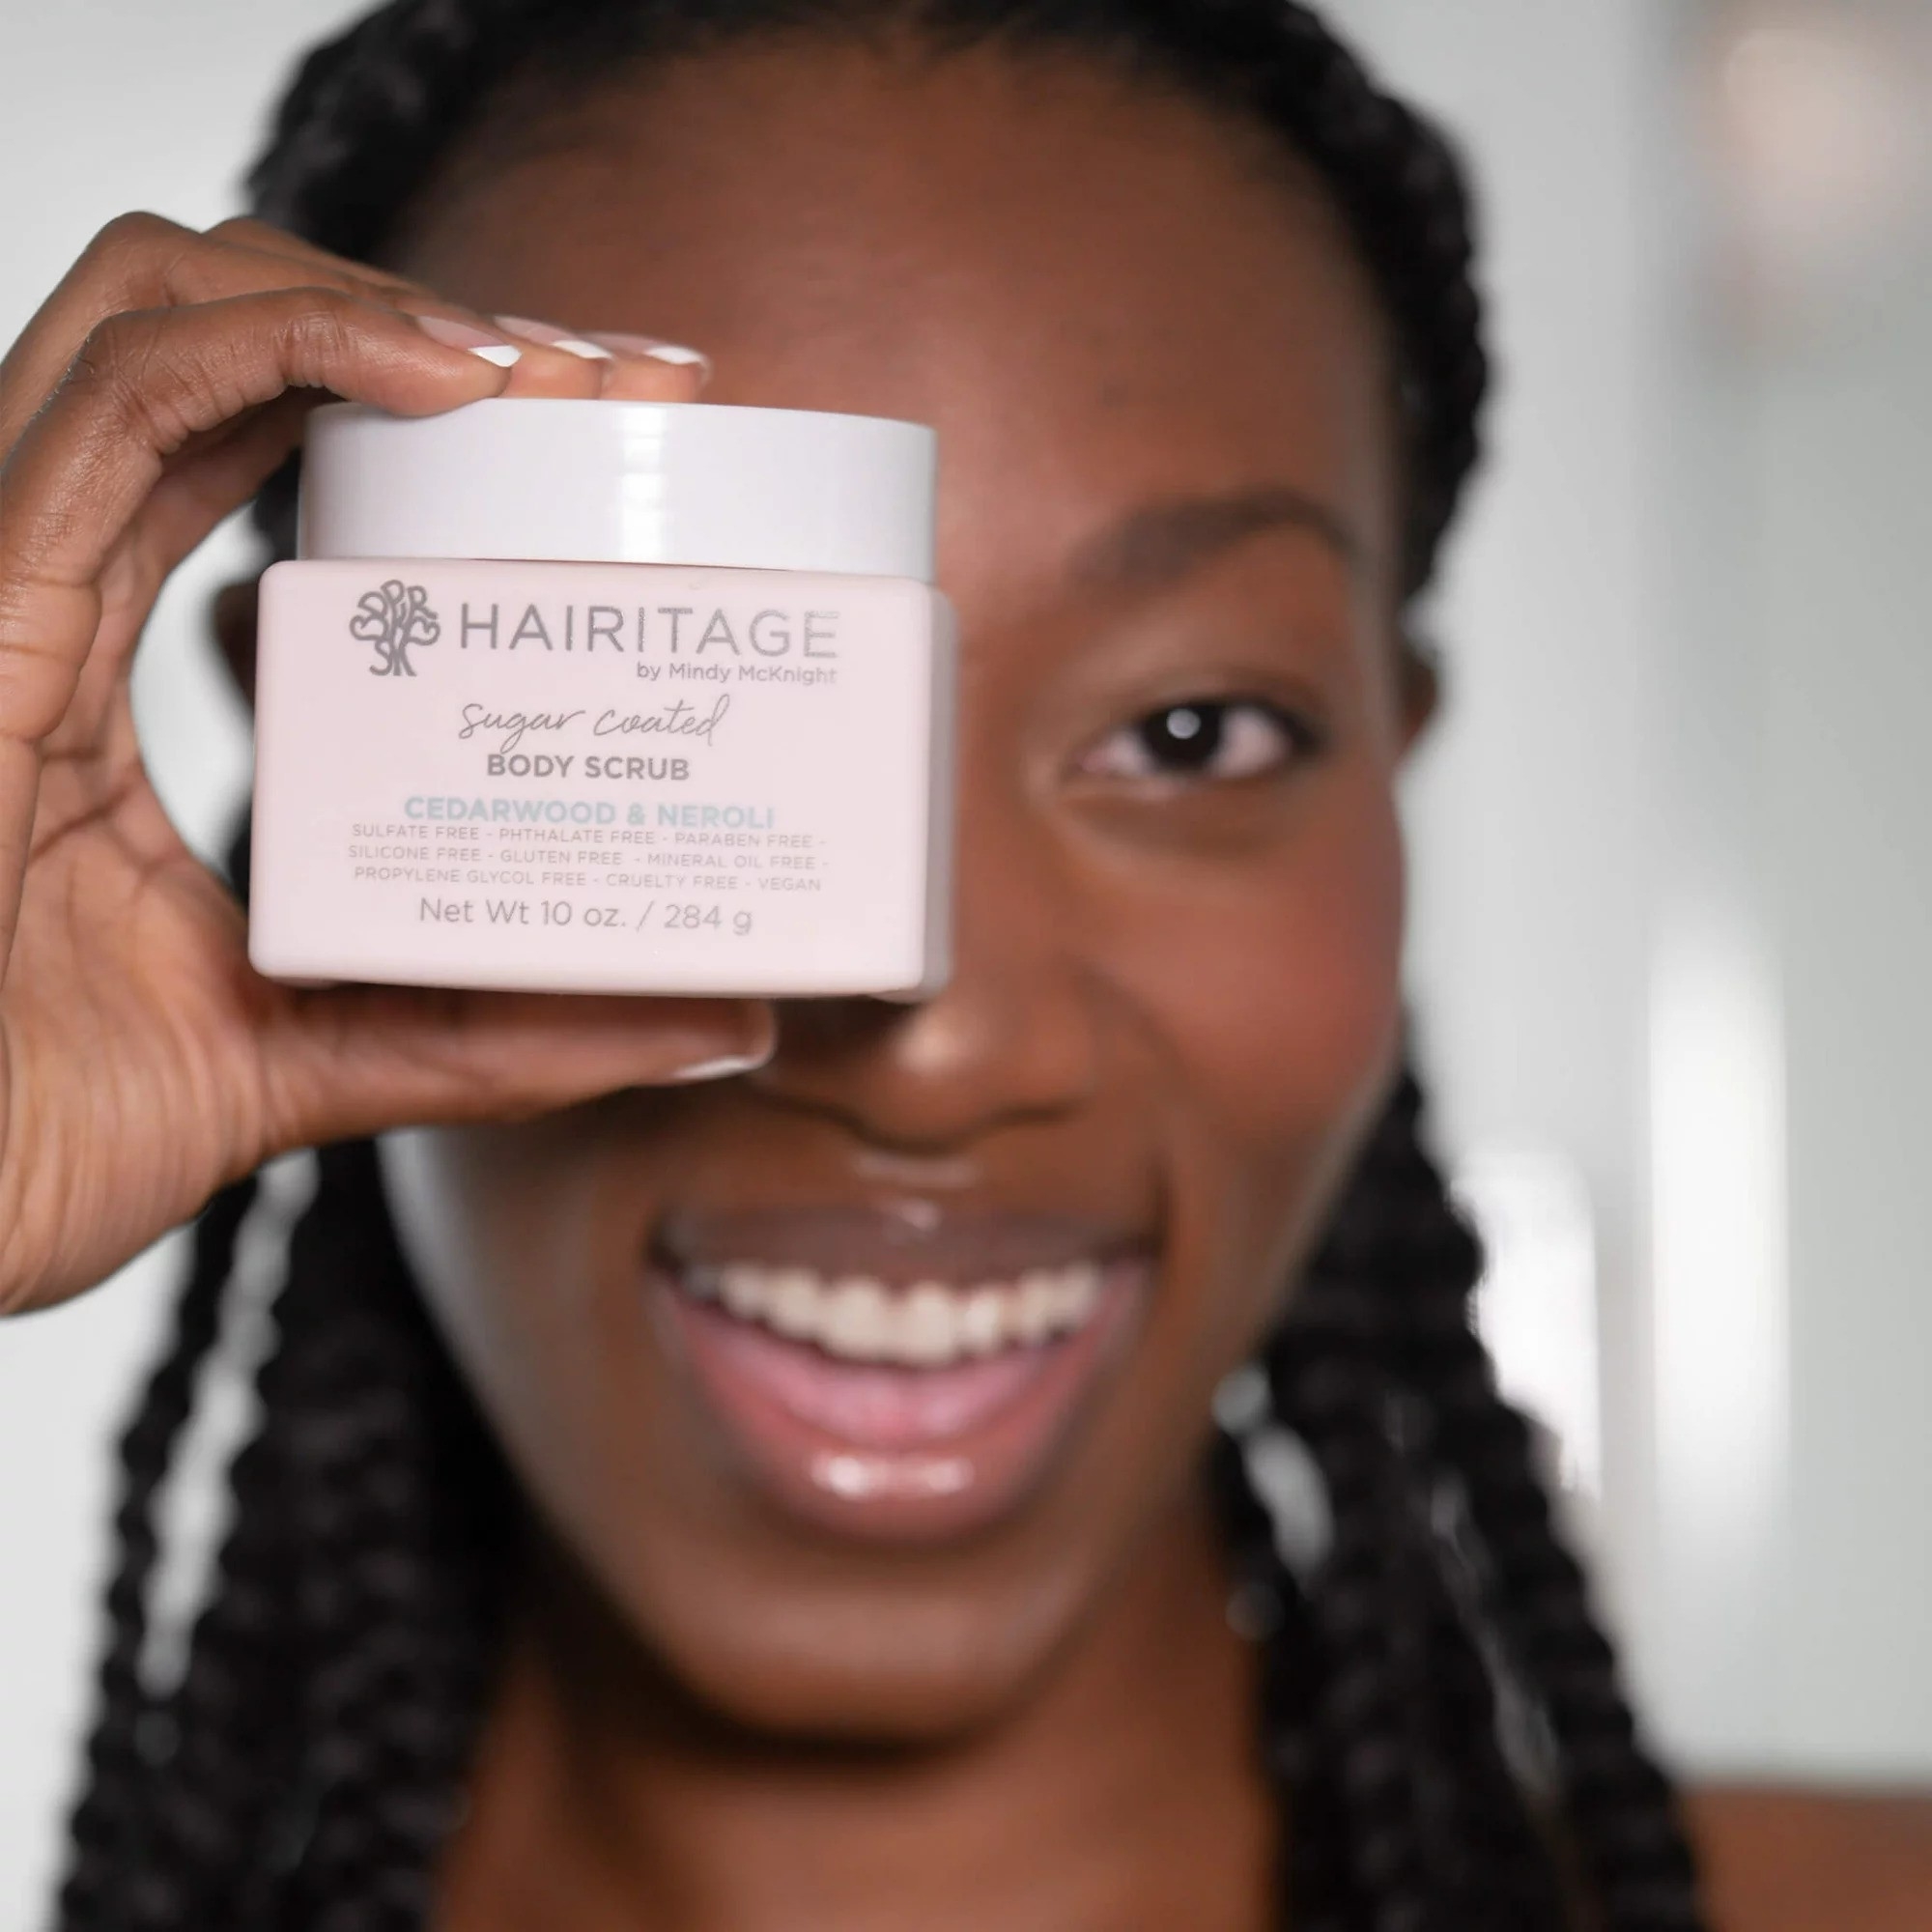 Model smiling, holding a Hairitage Sugar Coated Body Scrub jar close to the camera